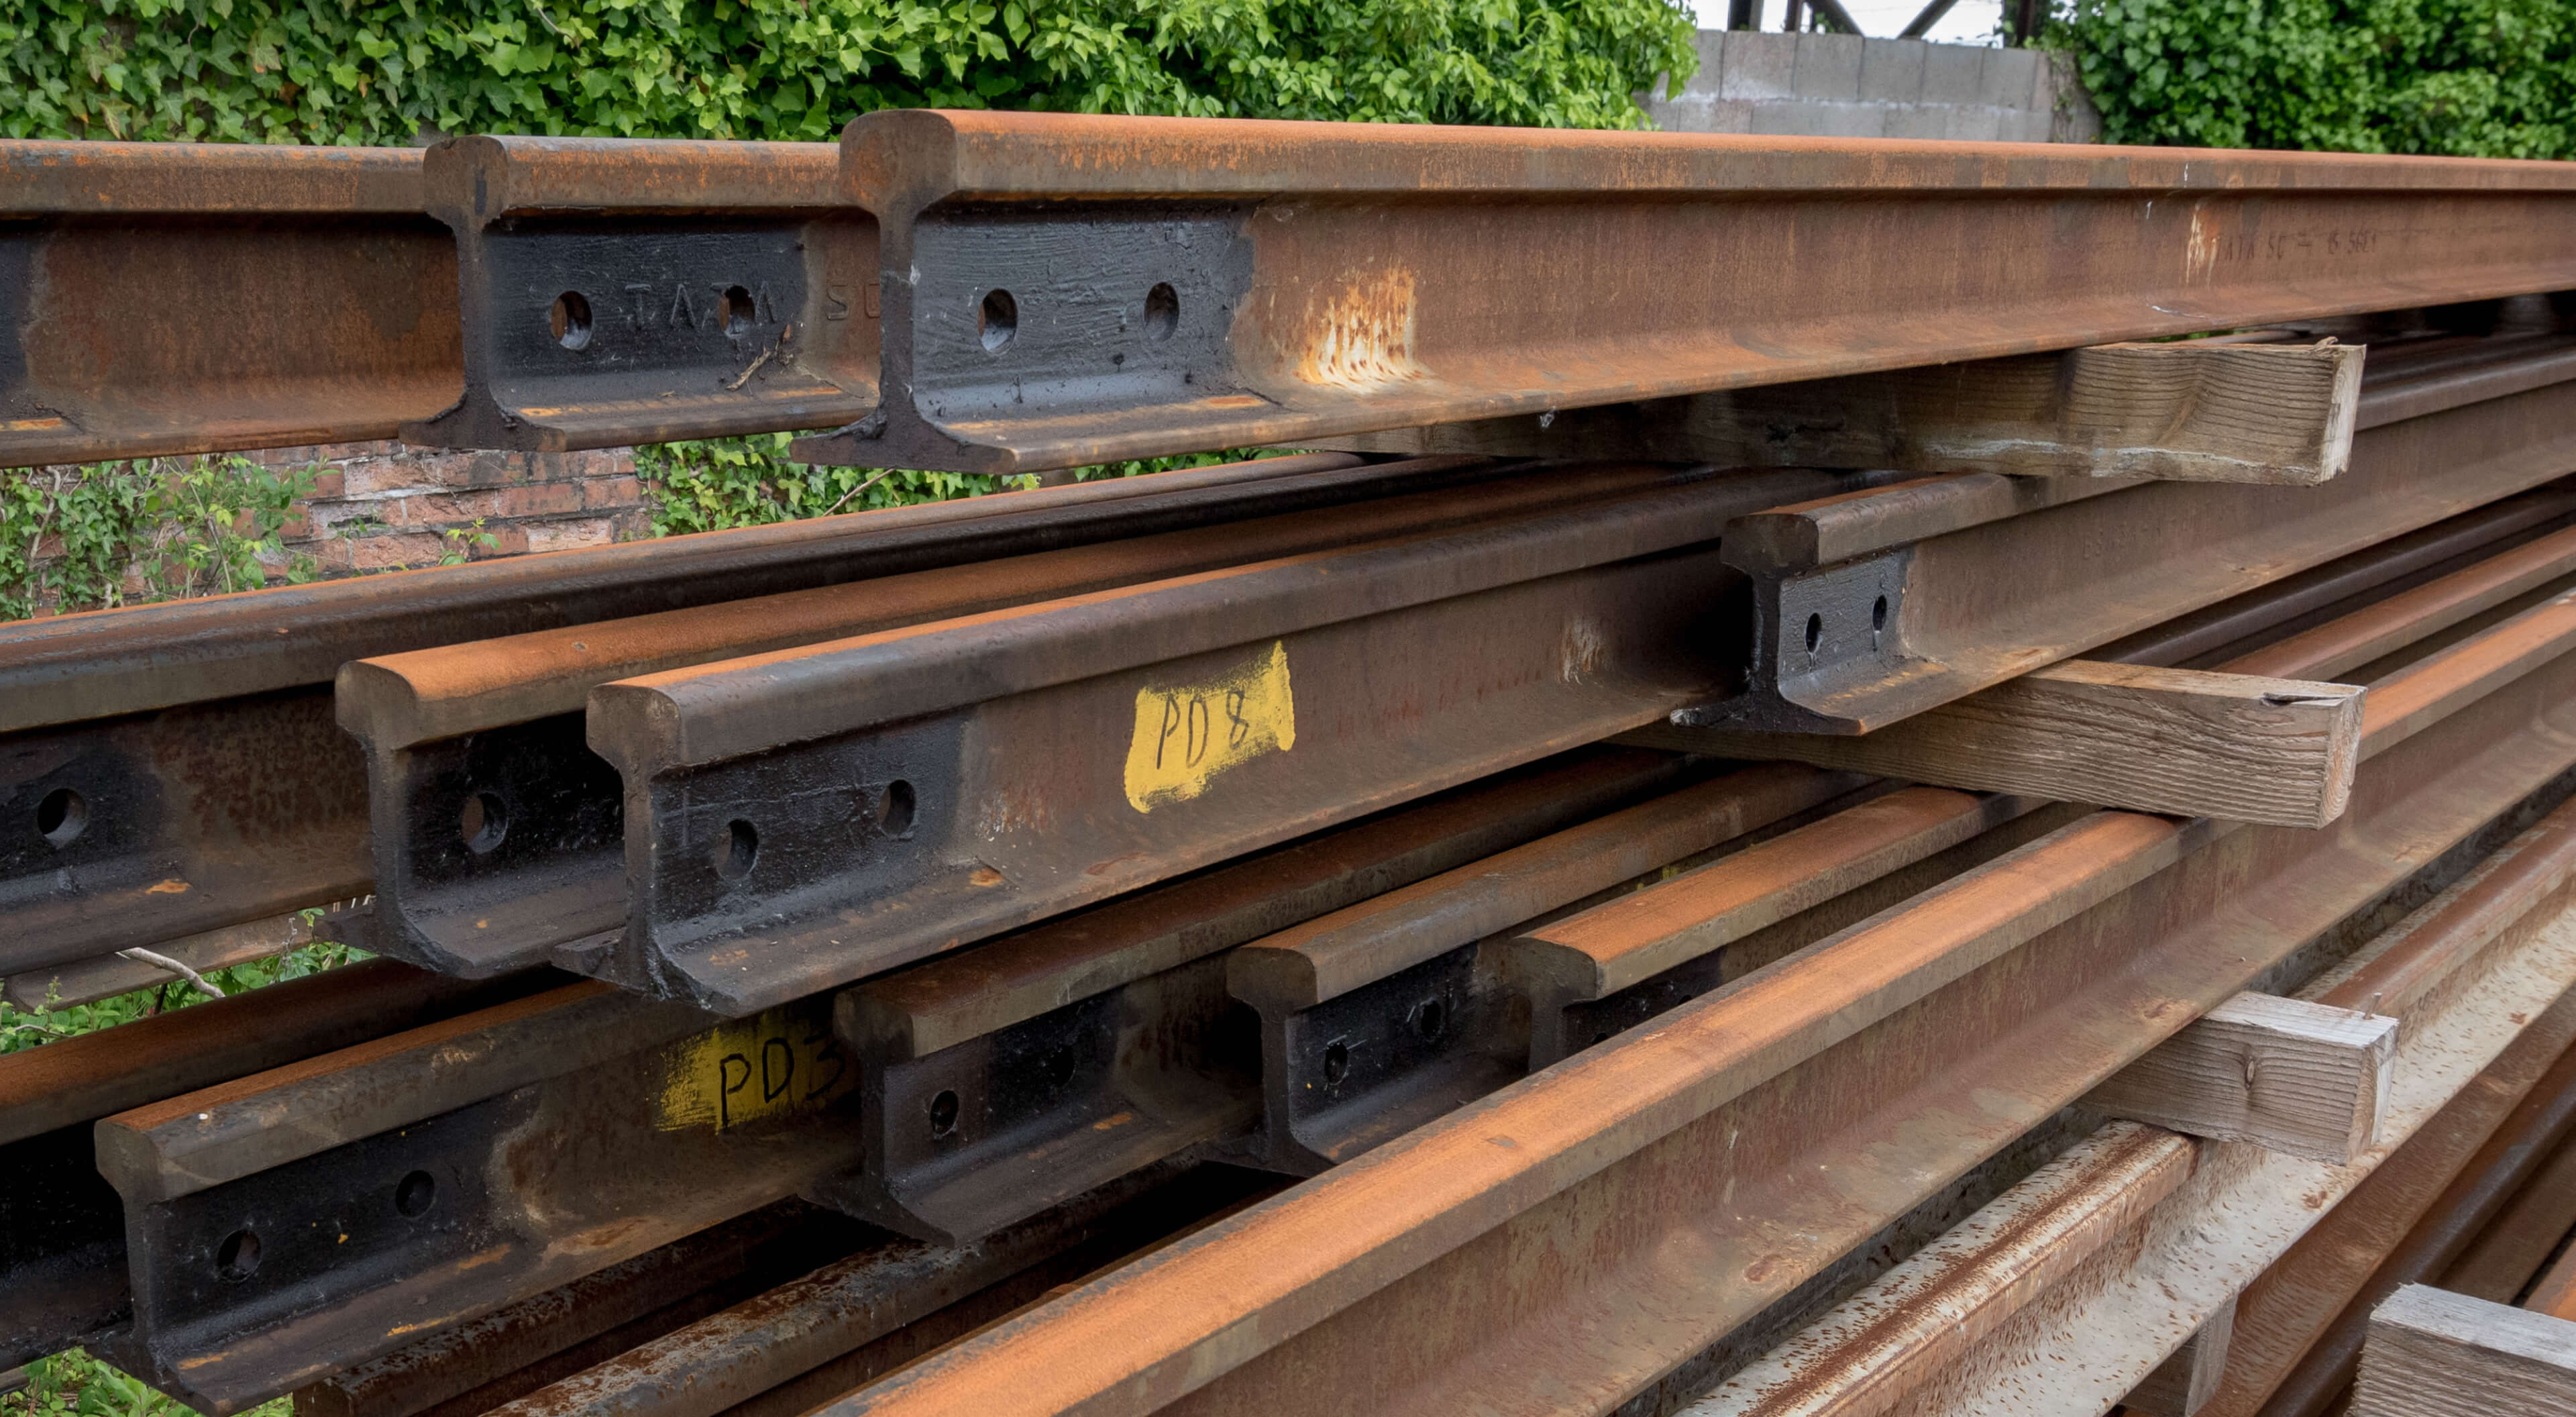 Stacked rail sections in the gb rail yard